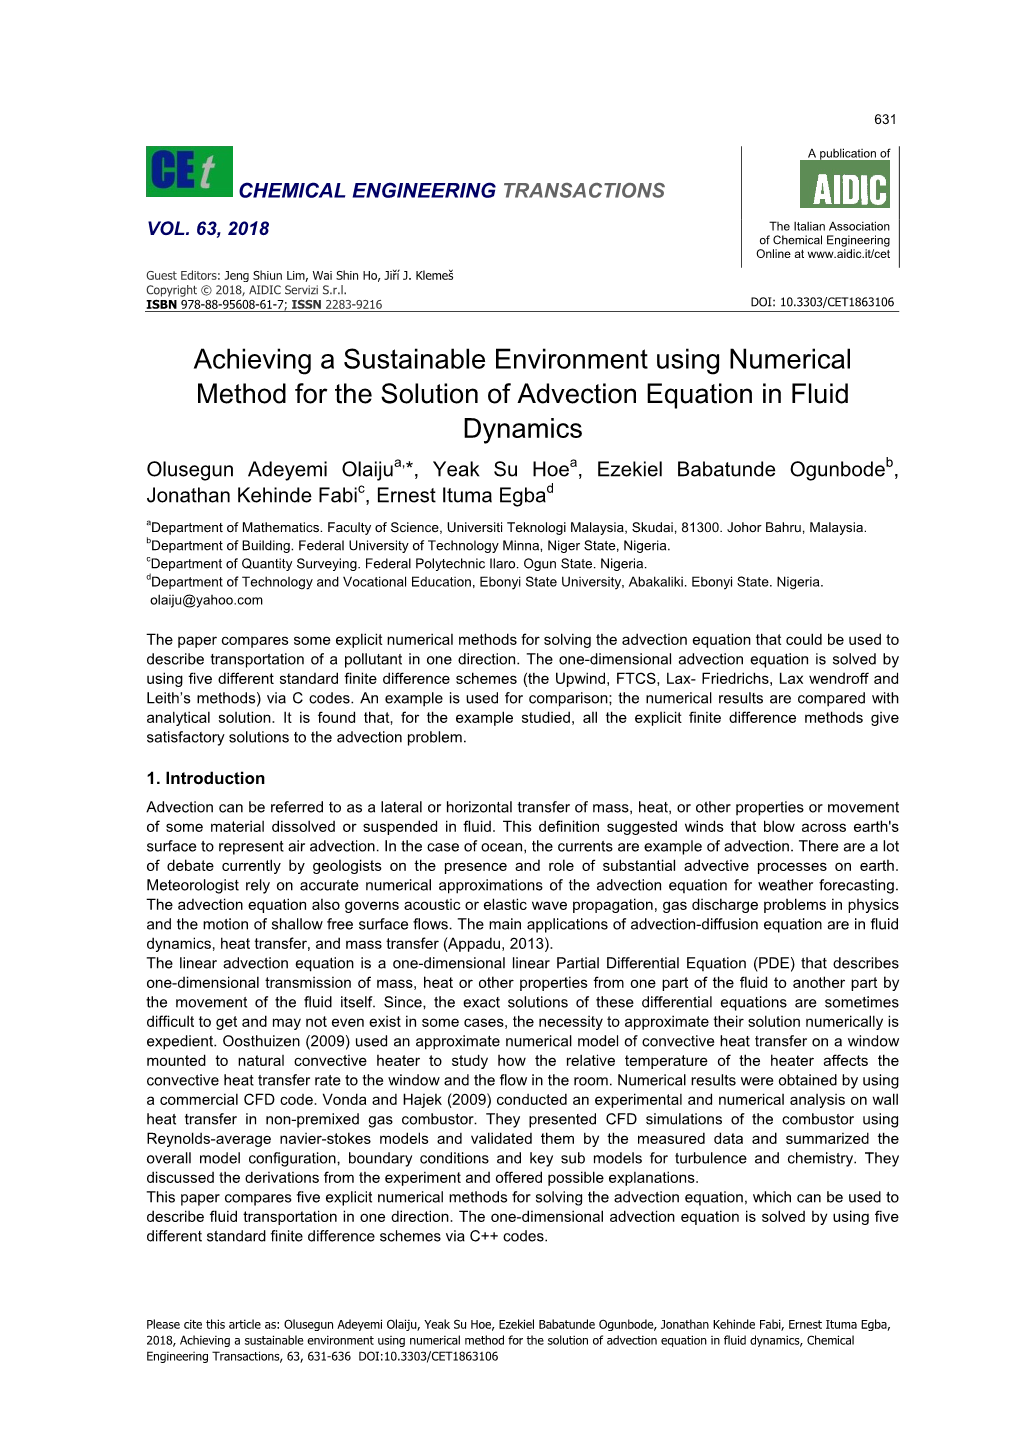 Achieving a Sustainable Environment Using Numerical Method for the Solution of Advection Equation in Fluid Dynamics